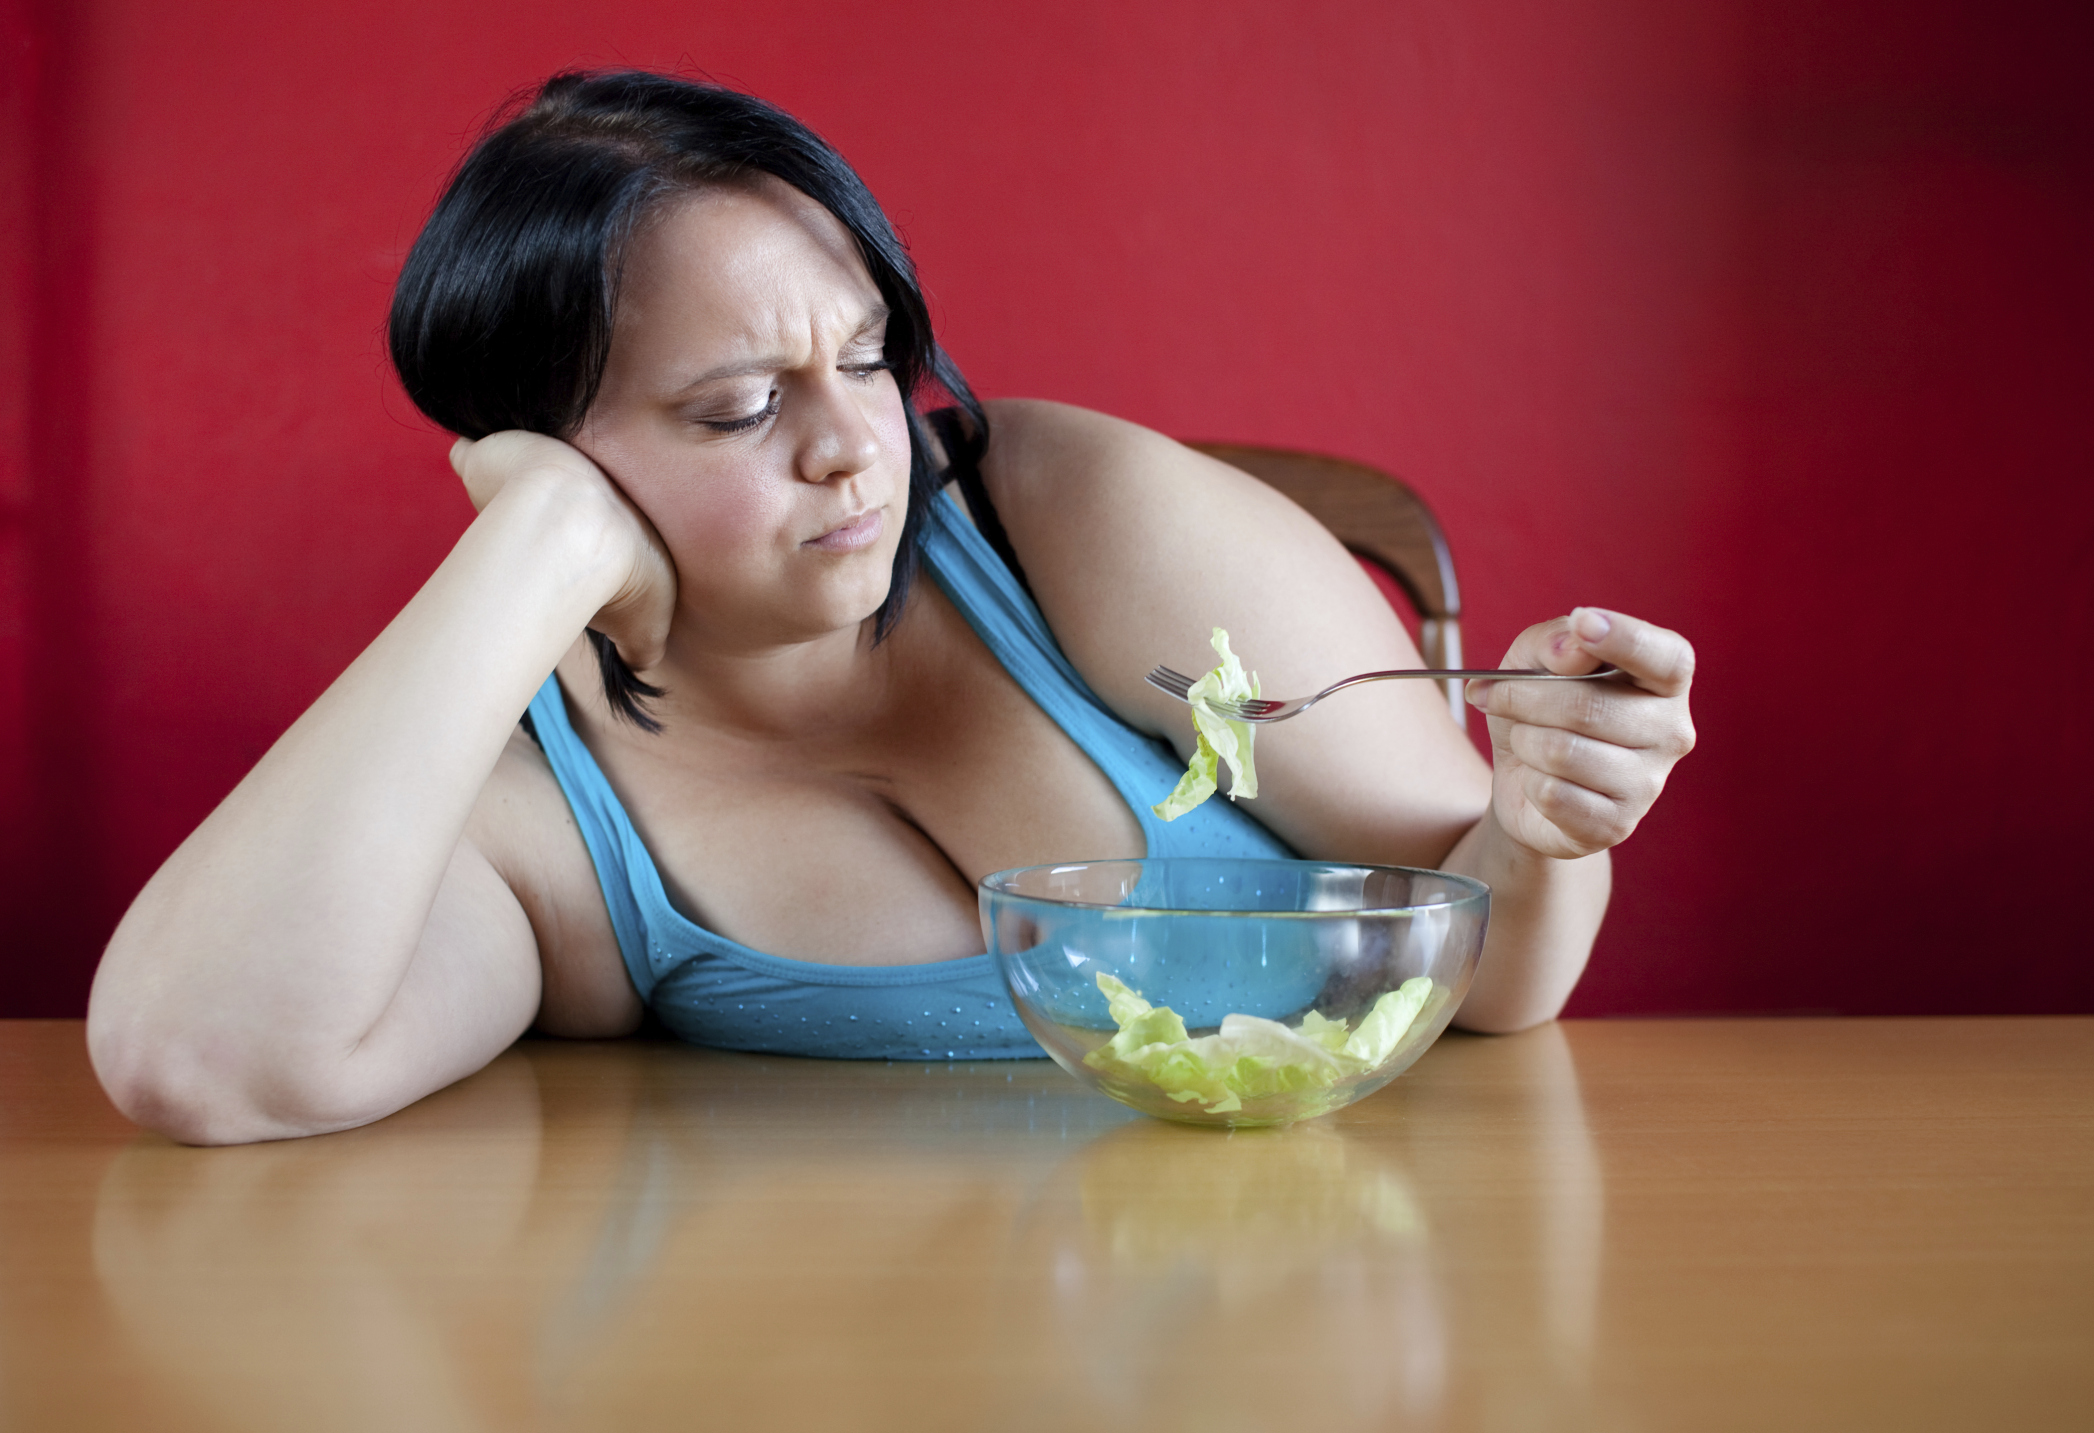 Unhappy overweight woman with her meal